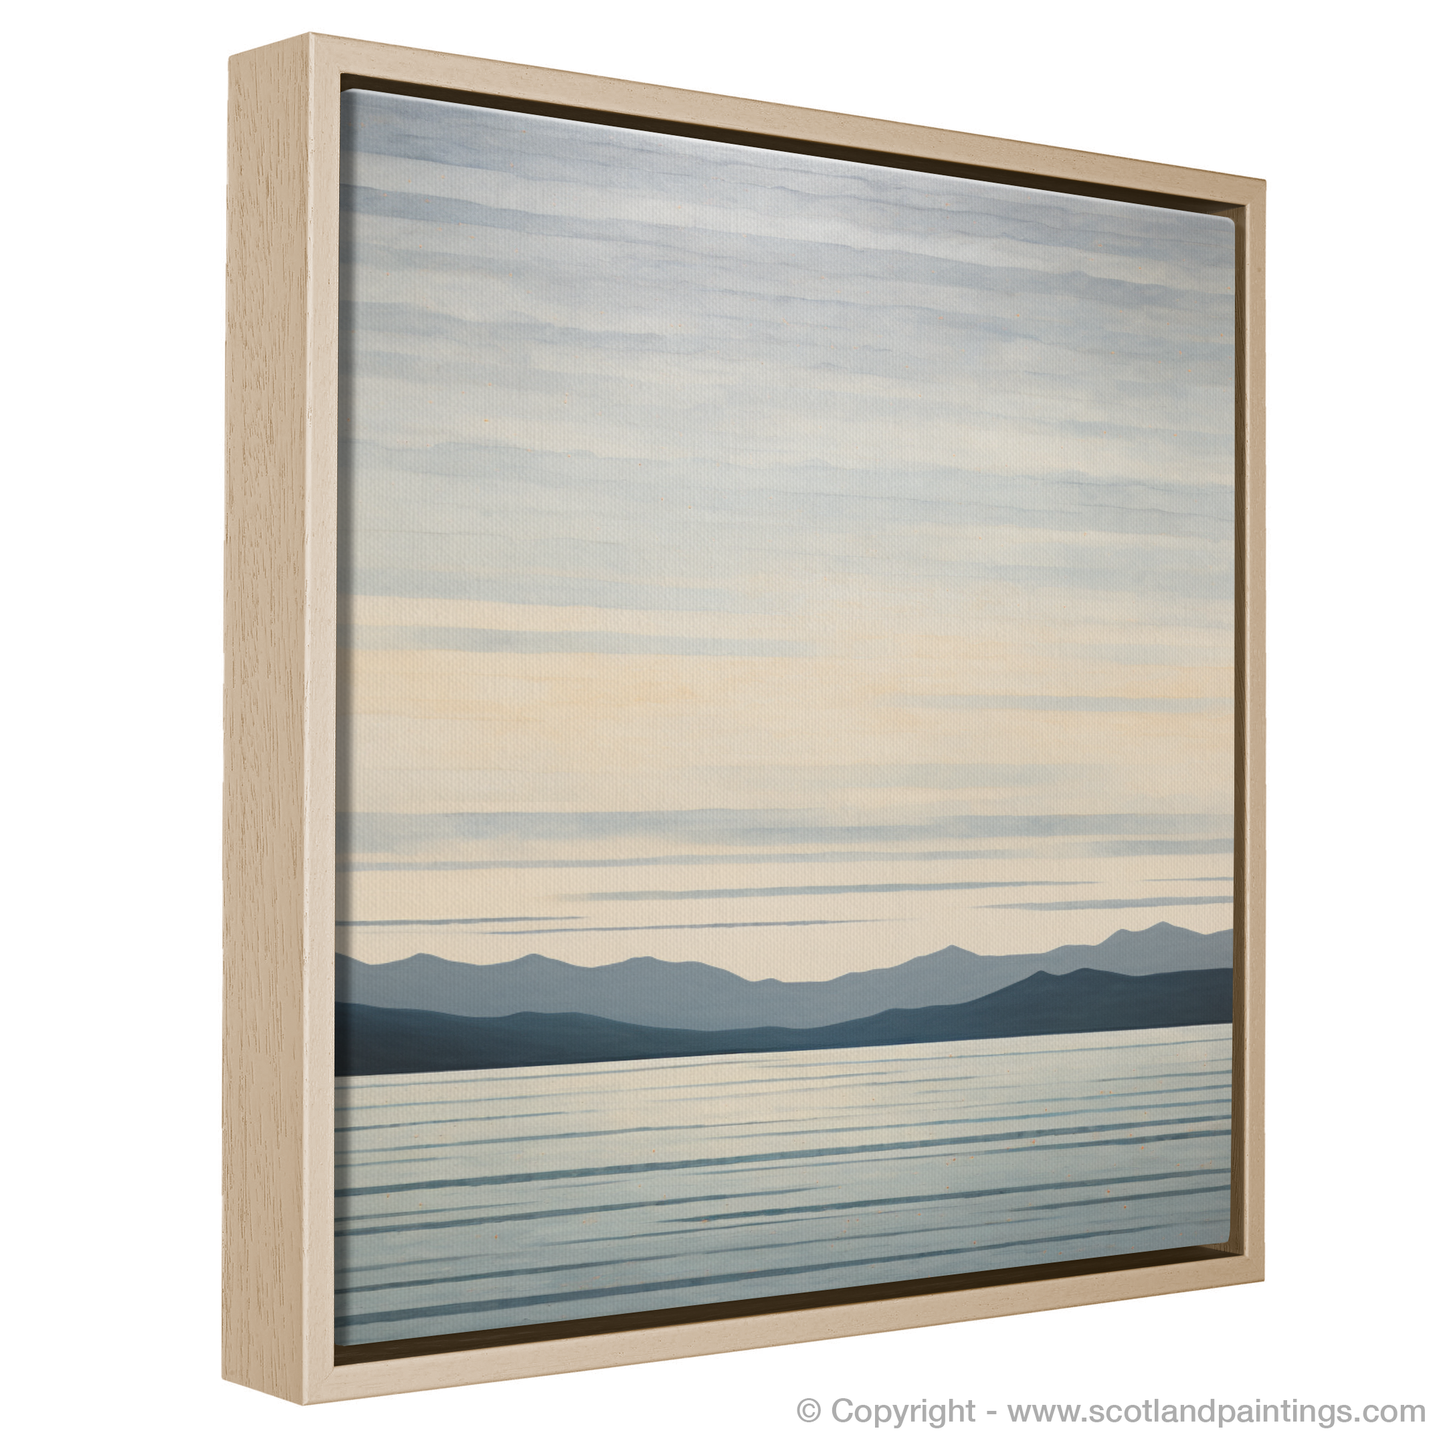 Painting and Art Print of A huge sky above Loch Lomond entitled "Serenity of Loch Lomond: A Minimalist Homage".